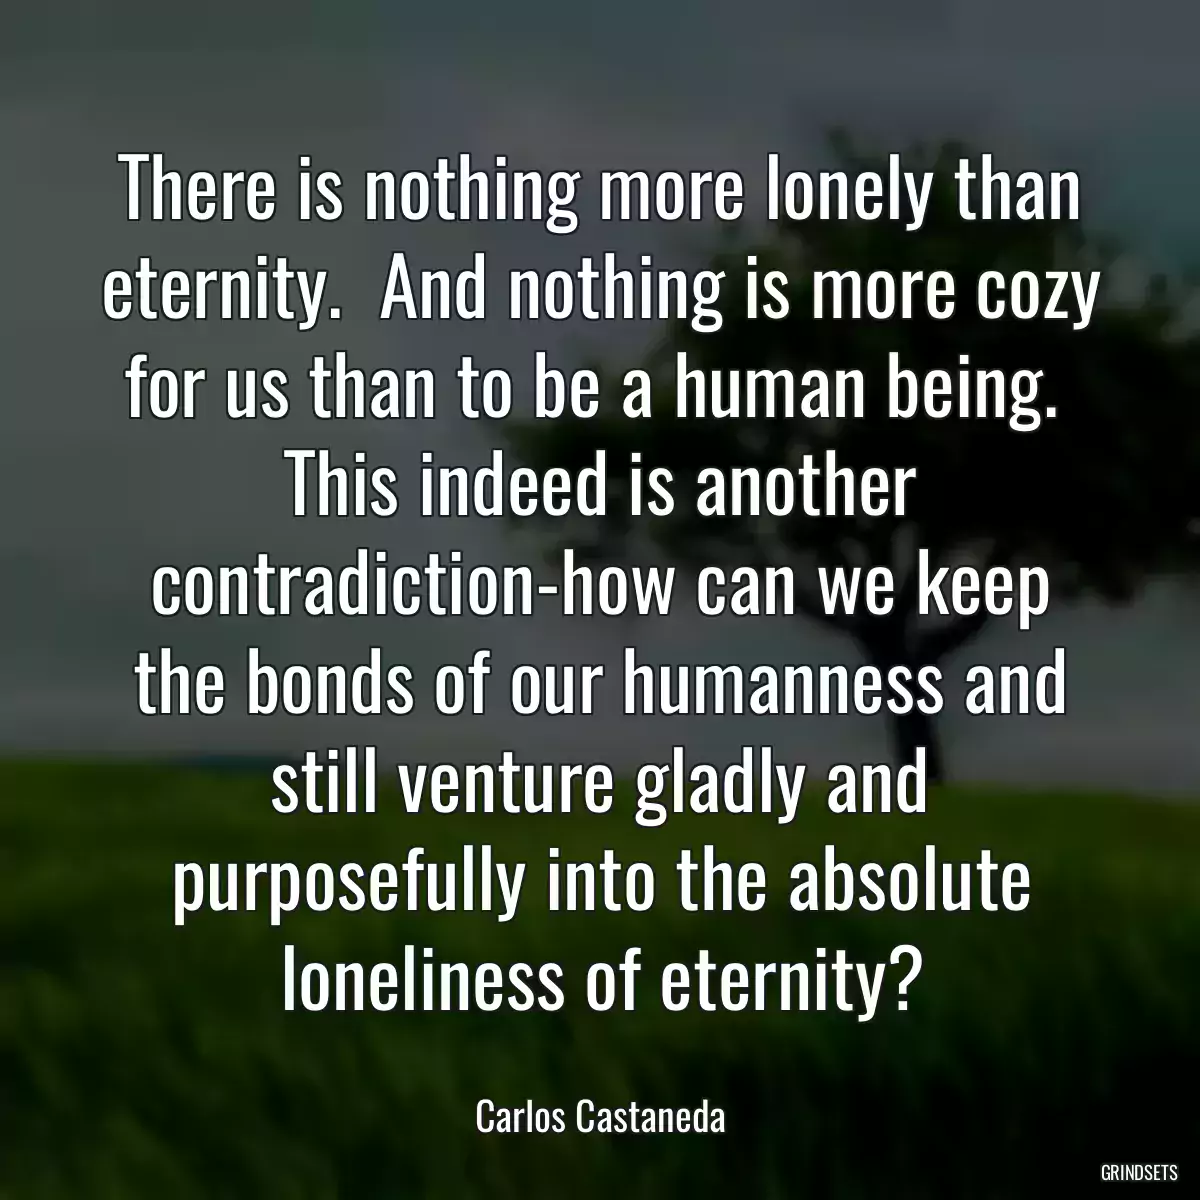 There is nothing more lonely than eternity.  And nothing is more cozy for us than to be a human being.  This indeed is another contradiction-how can we keep the bonds of our humanness and still venture gladly and purposefully into the absolute loneliness of eternity?